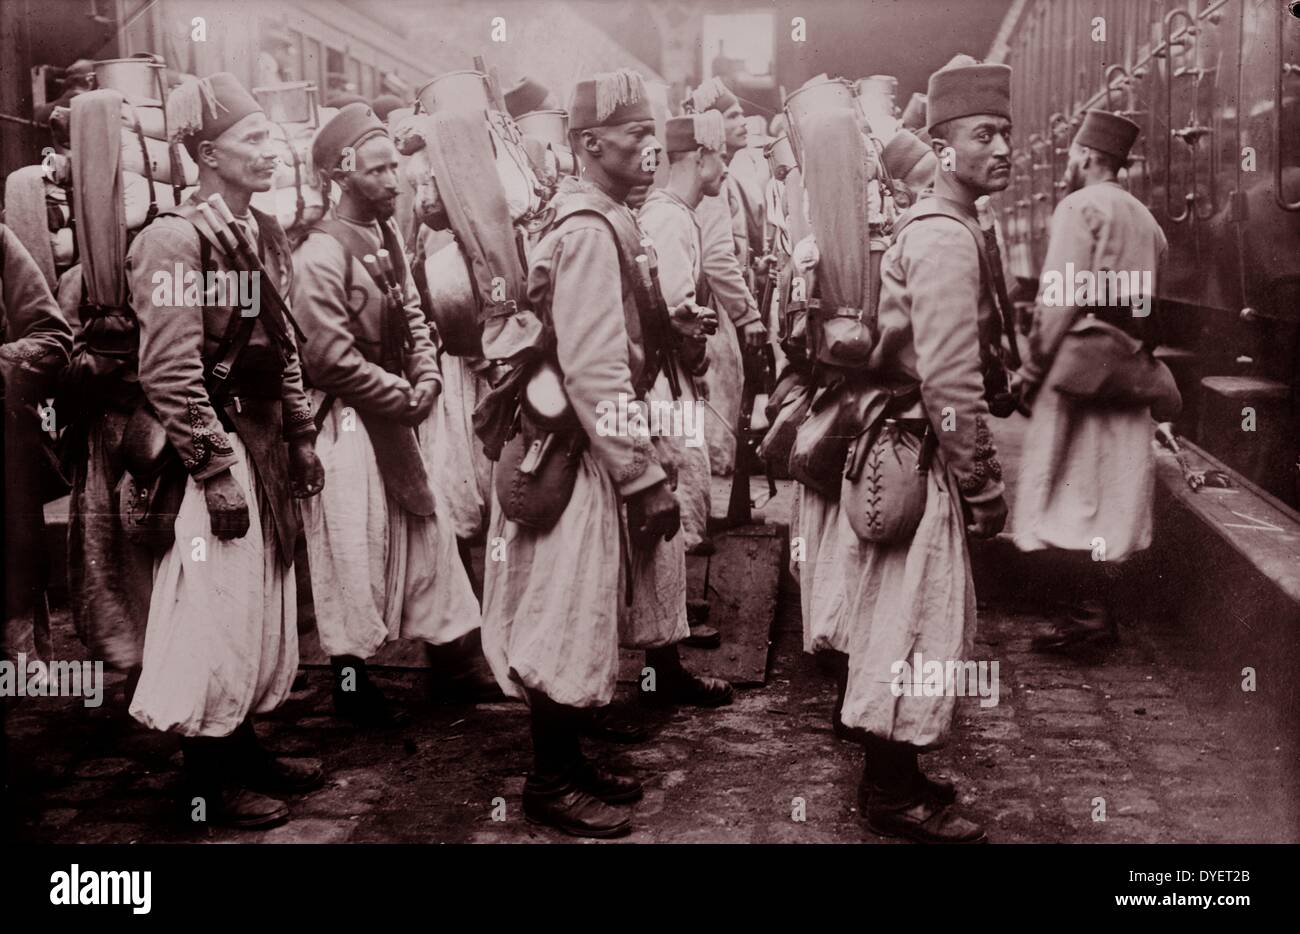 Photograph shows Algerian soldiers in Europe during World War I. Stock Photo